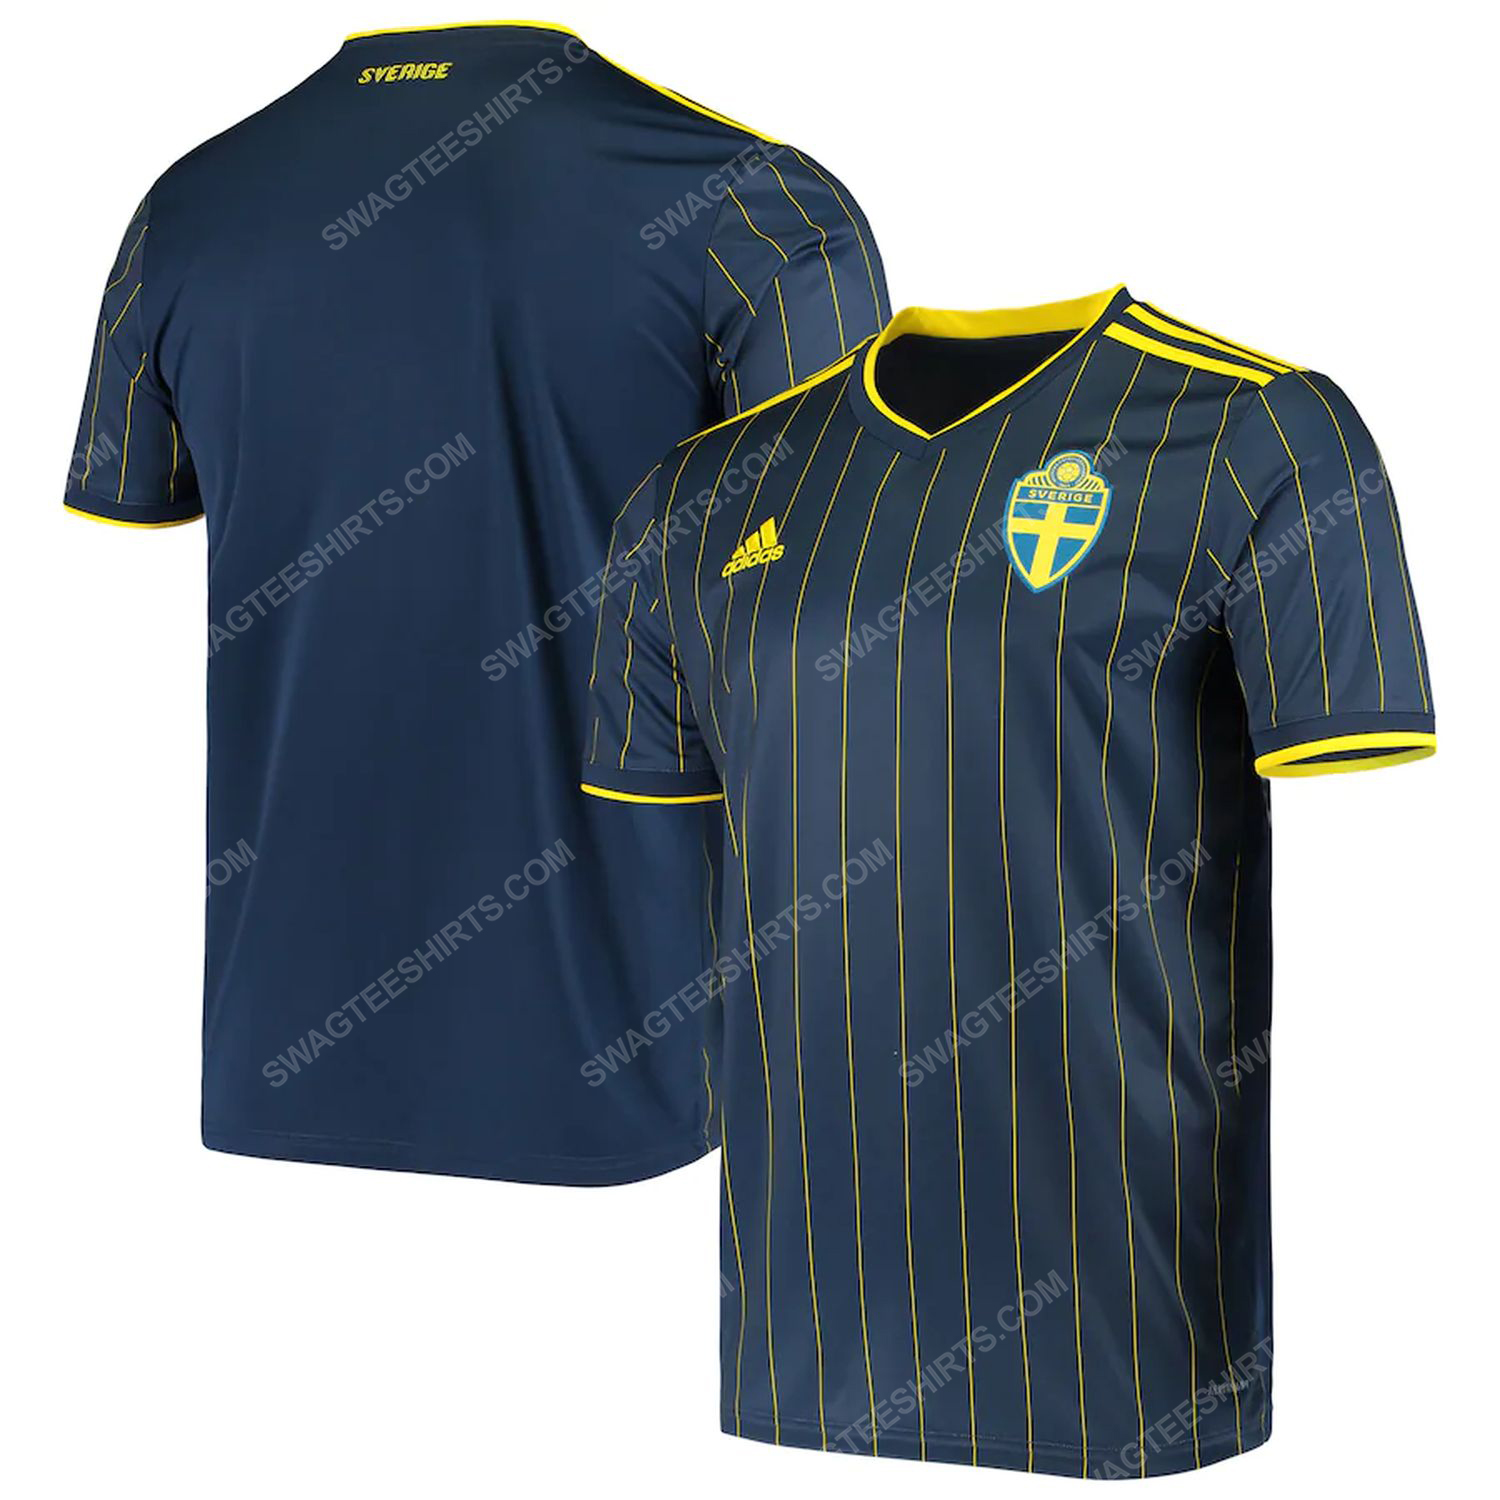 [special edition] The sweden national football team full print football jersey – Maria